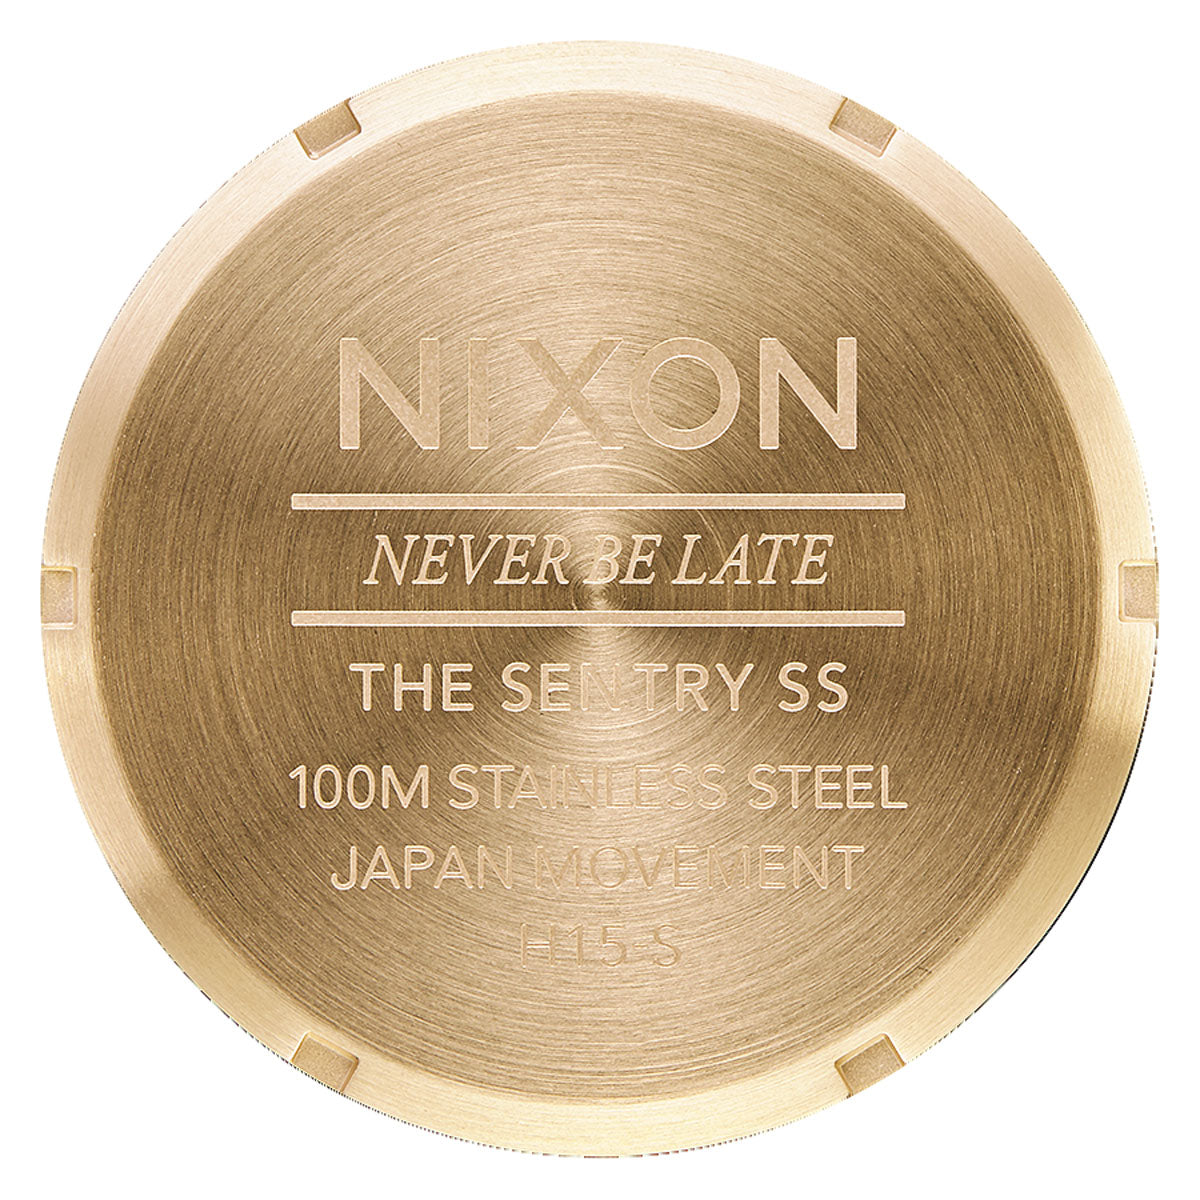 Nixon Sentry Stainless Steel Watch - Oxblood Sunray/Gold image 4